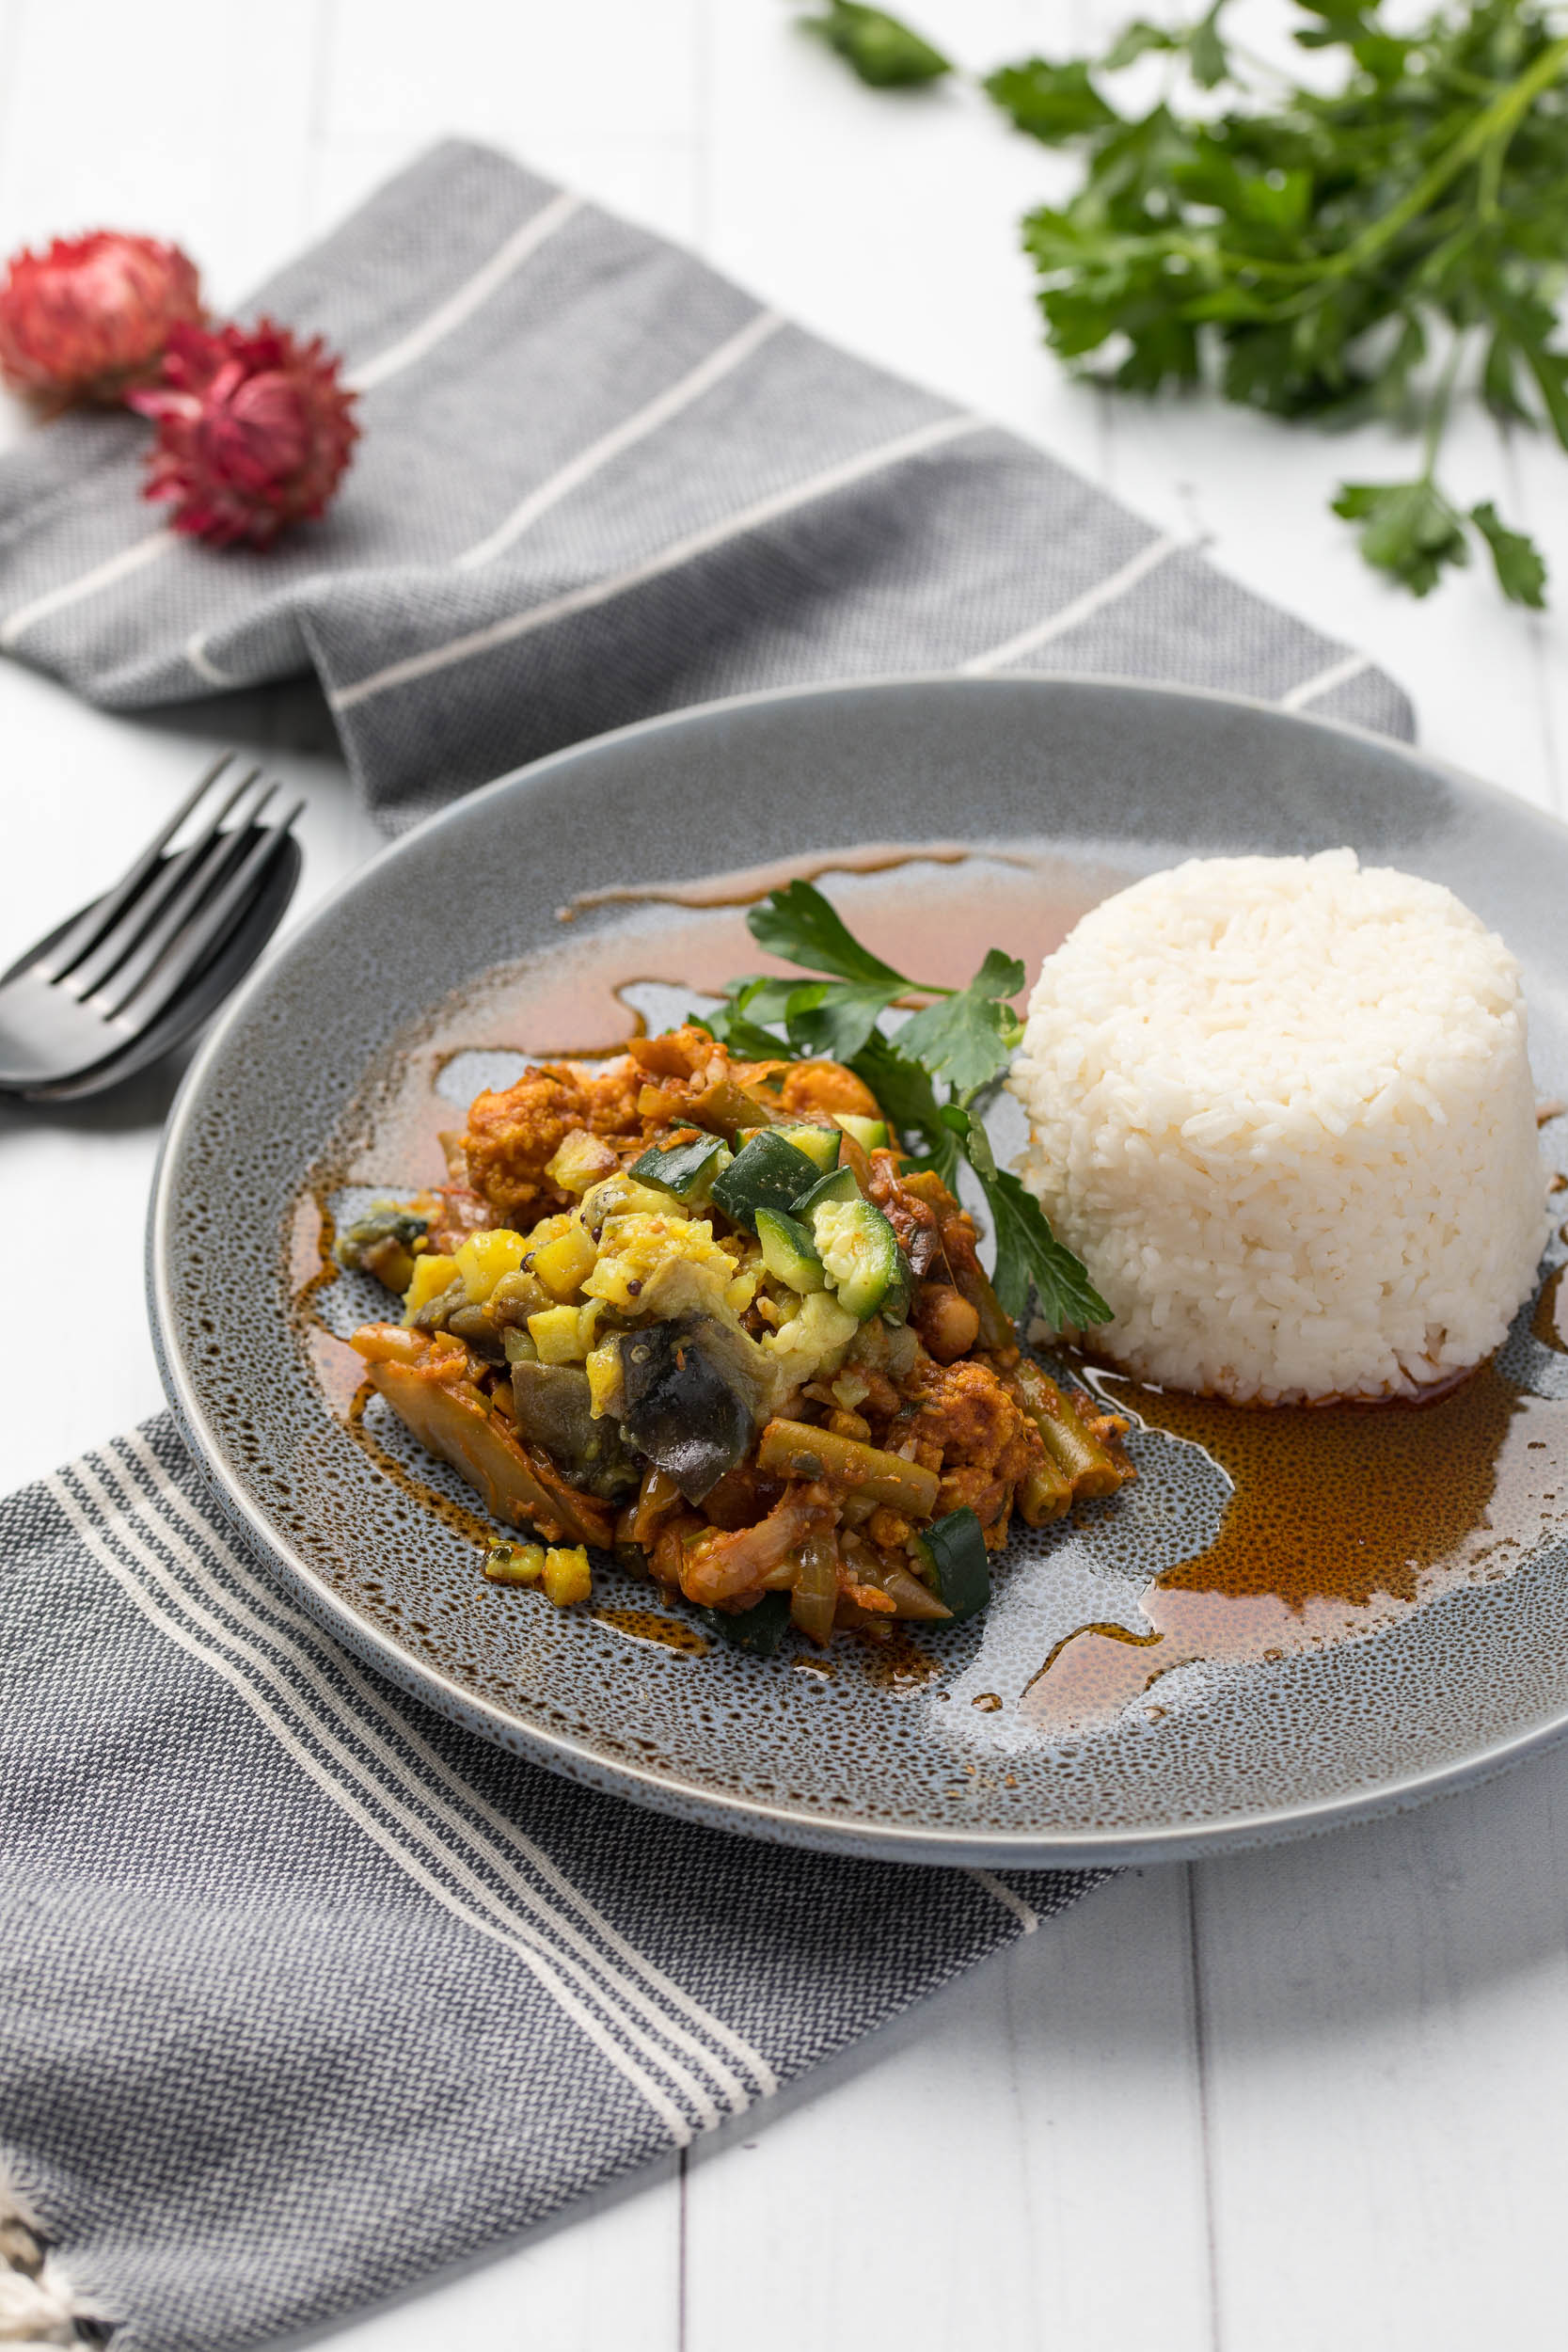 Experience the vibrant flavors of our Seasonal Vegetable Curry & Rice, packed with fresh veggies and traditional Indian spices, a delicious solo meal.